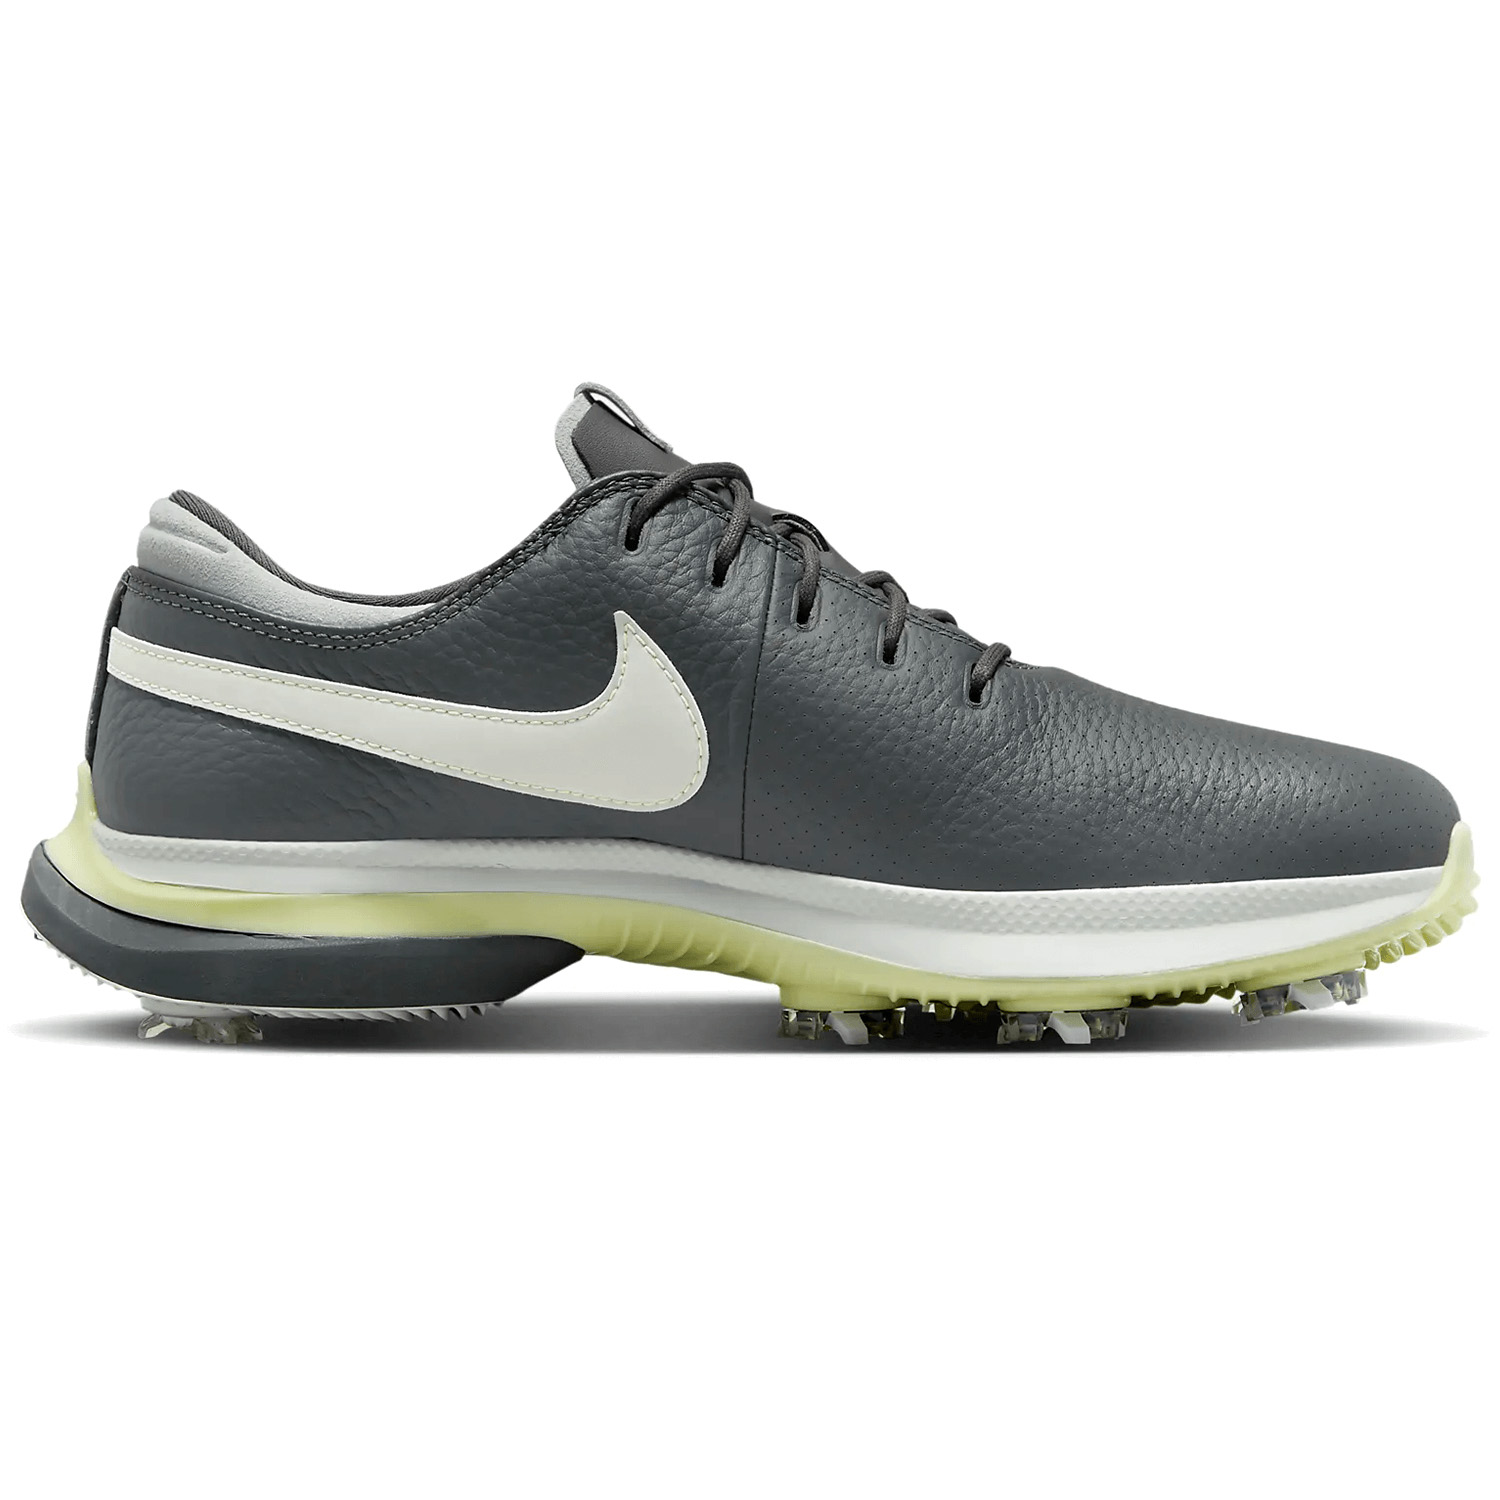 Nike Air Zoom Victory Tour 3 Golf Shoes – Iron Grey/Light Silver/Luminous Green